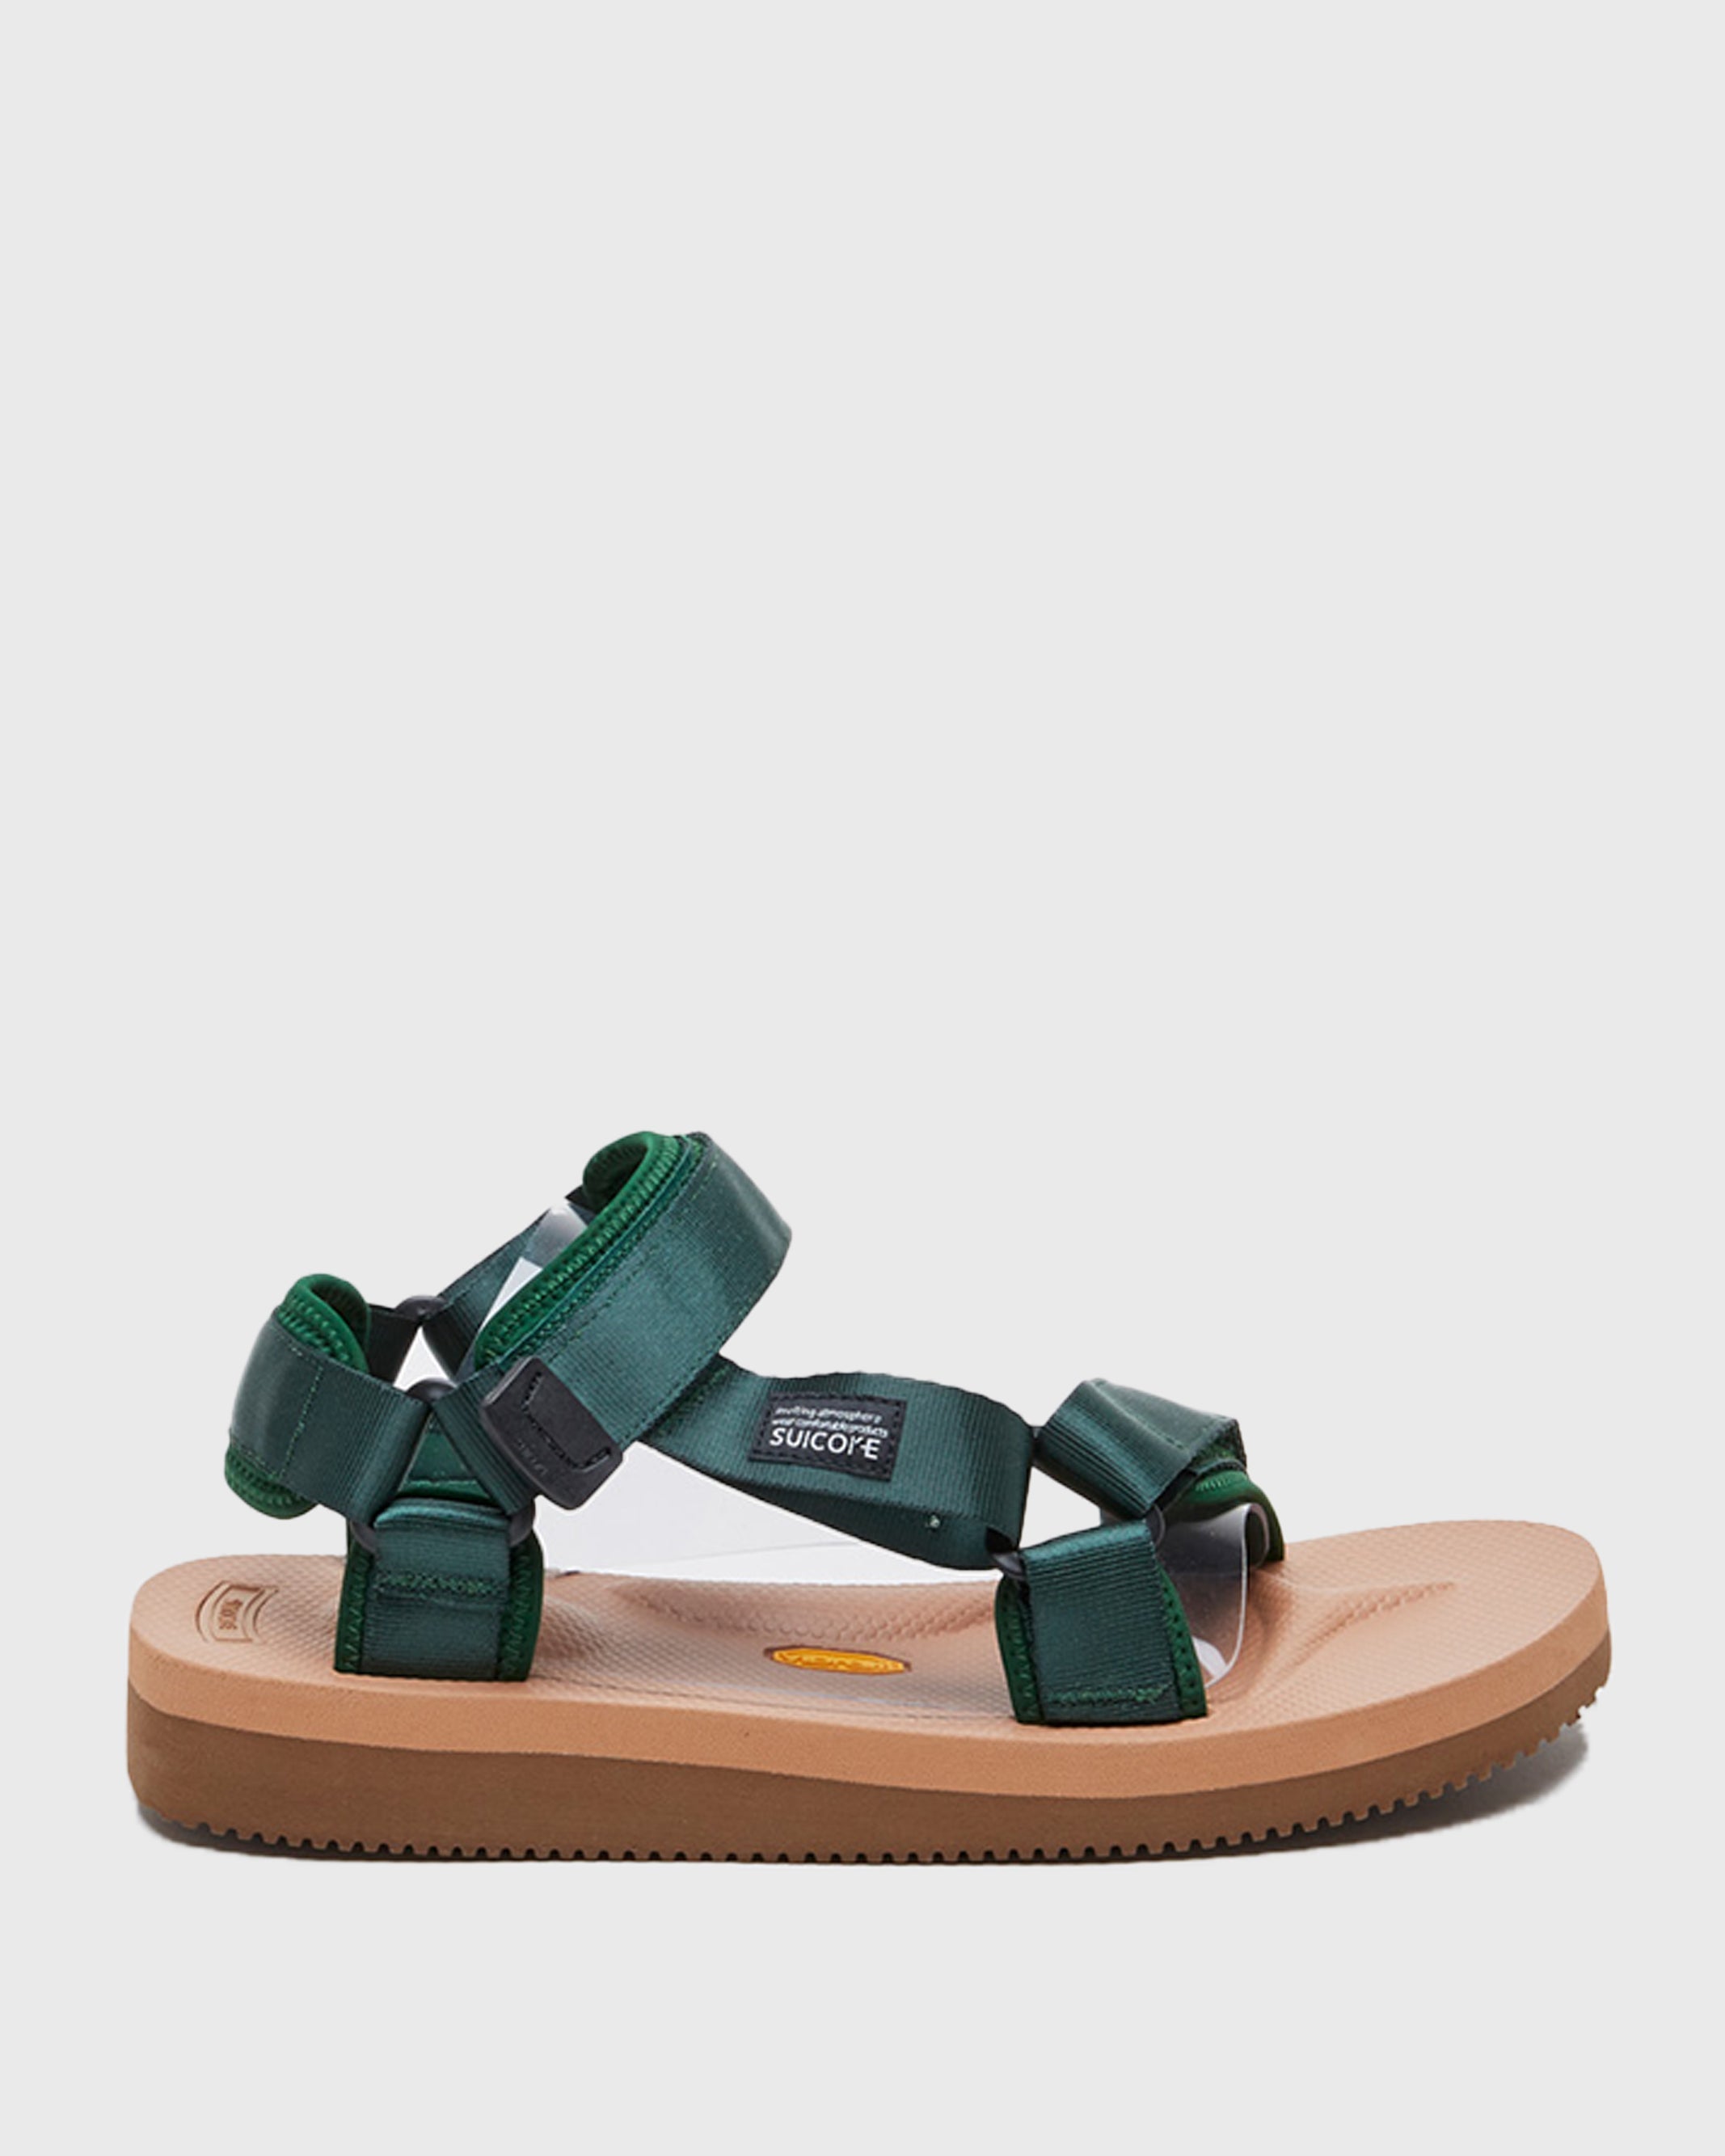 DEPA-V2 in Forest & Brown | Official SUICOKE US & CANADA Webstore